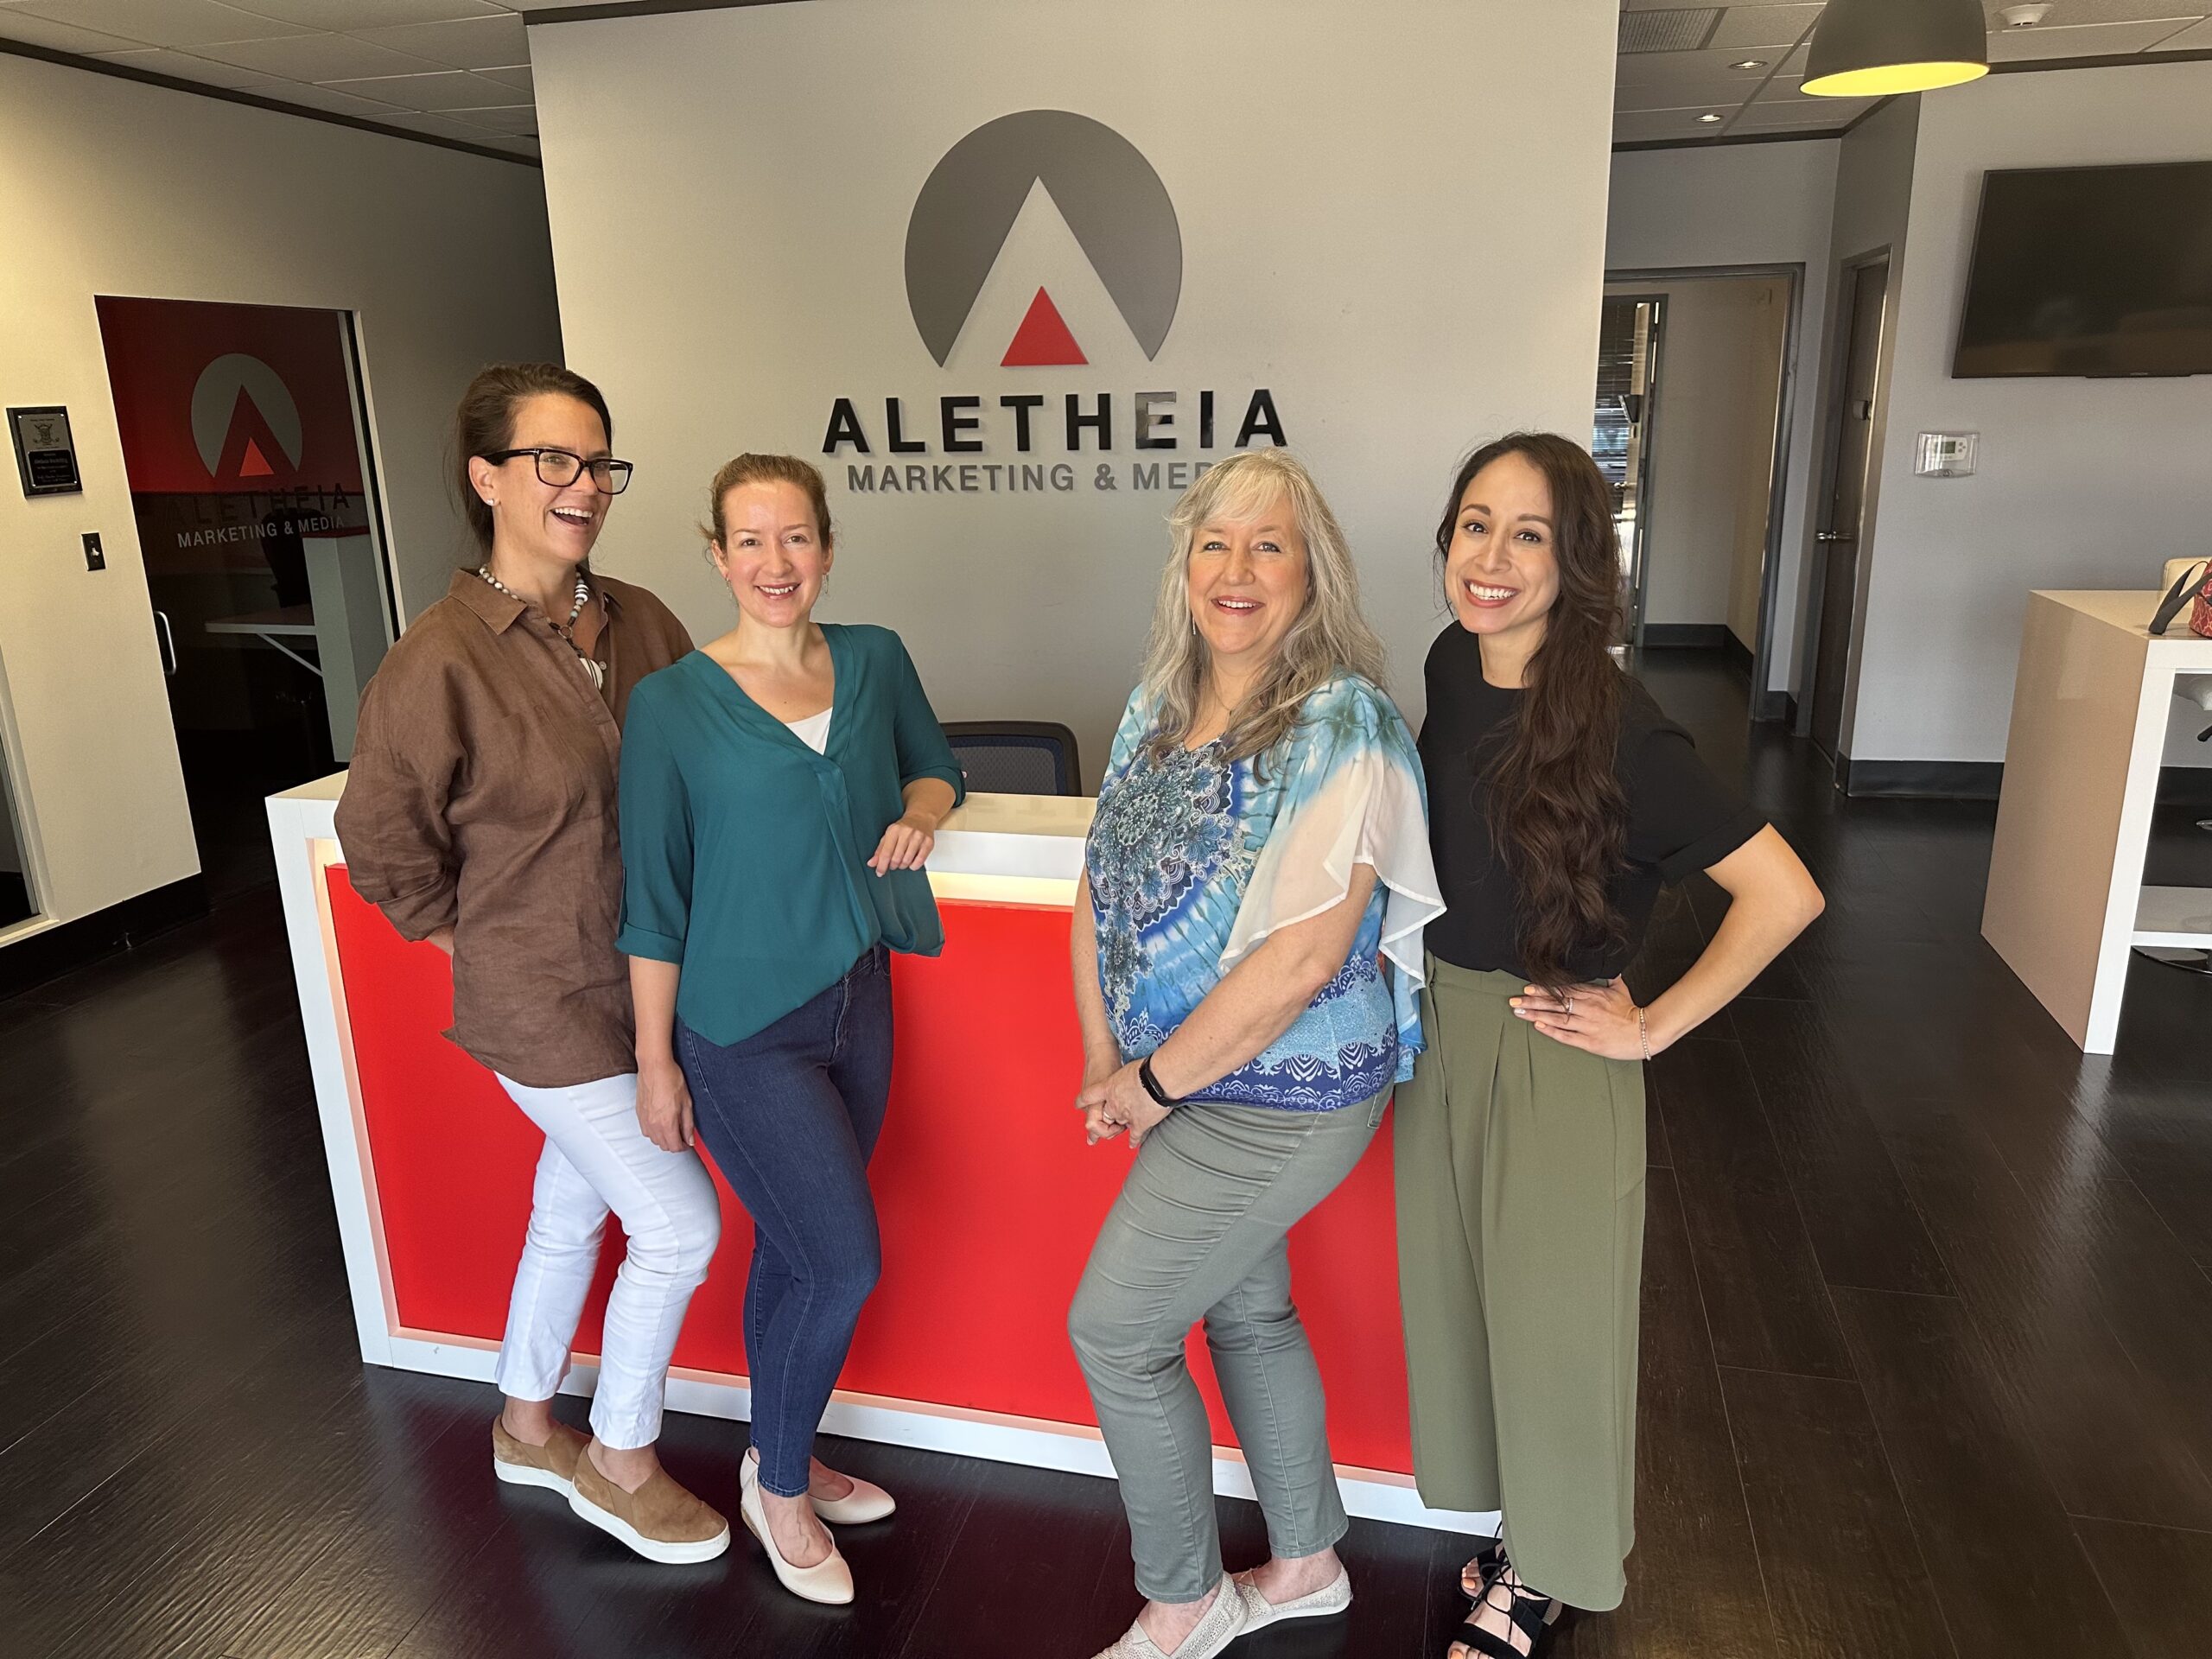 Meet the Women Business Leaders of Aletheia!